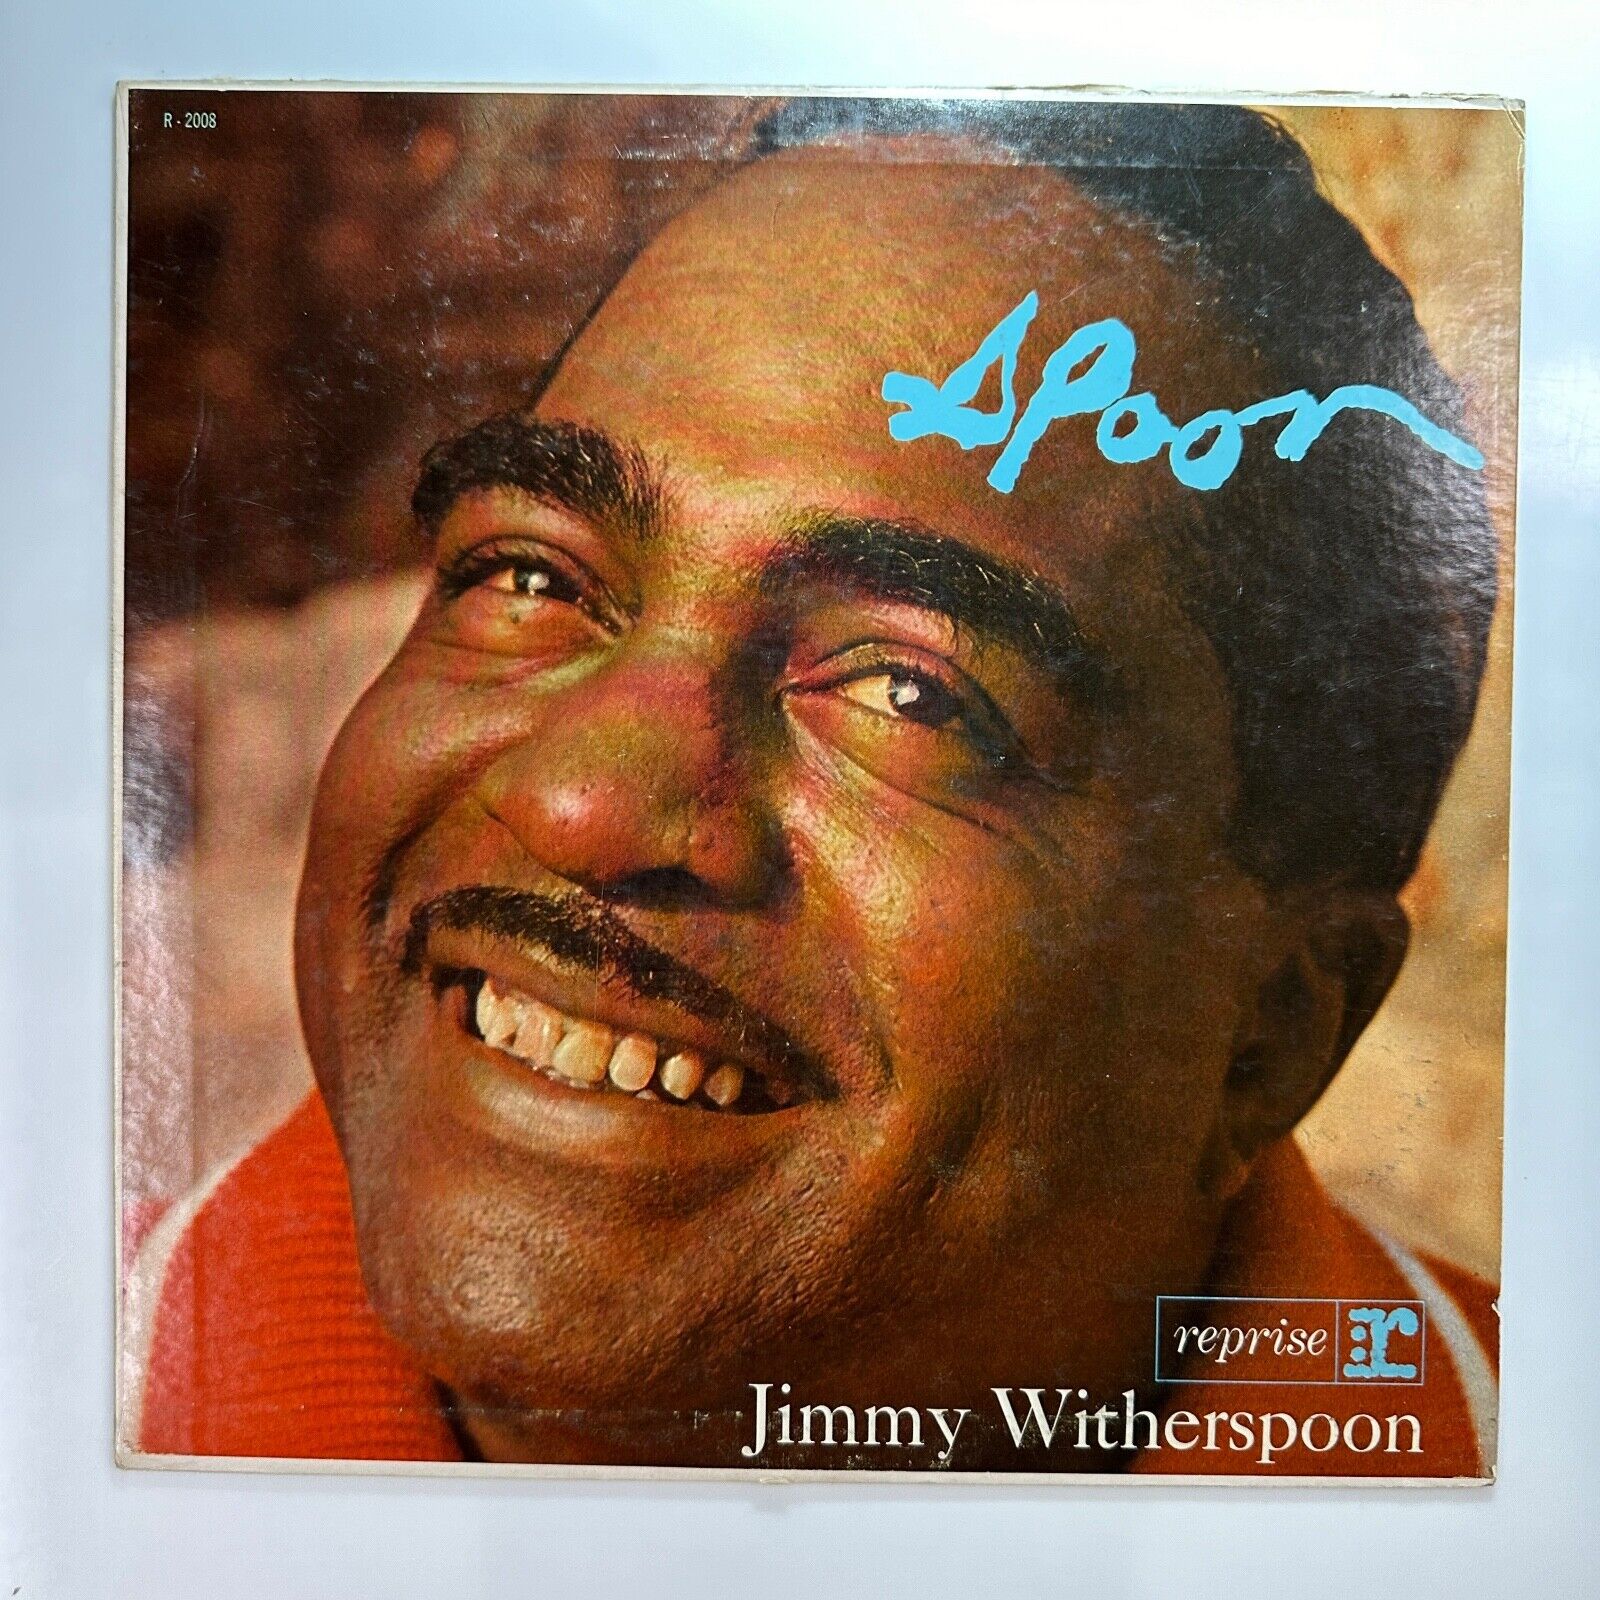 Spoon LP Record Vinyl Jimmy Witherspoon Reprise 2008